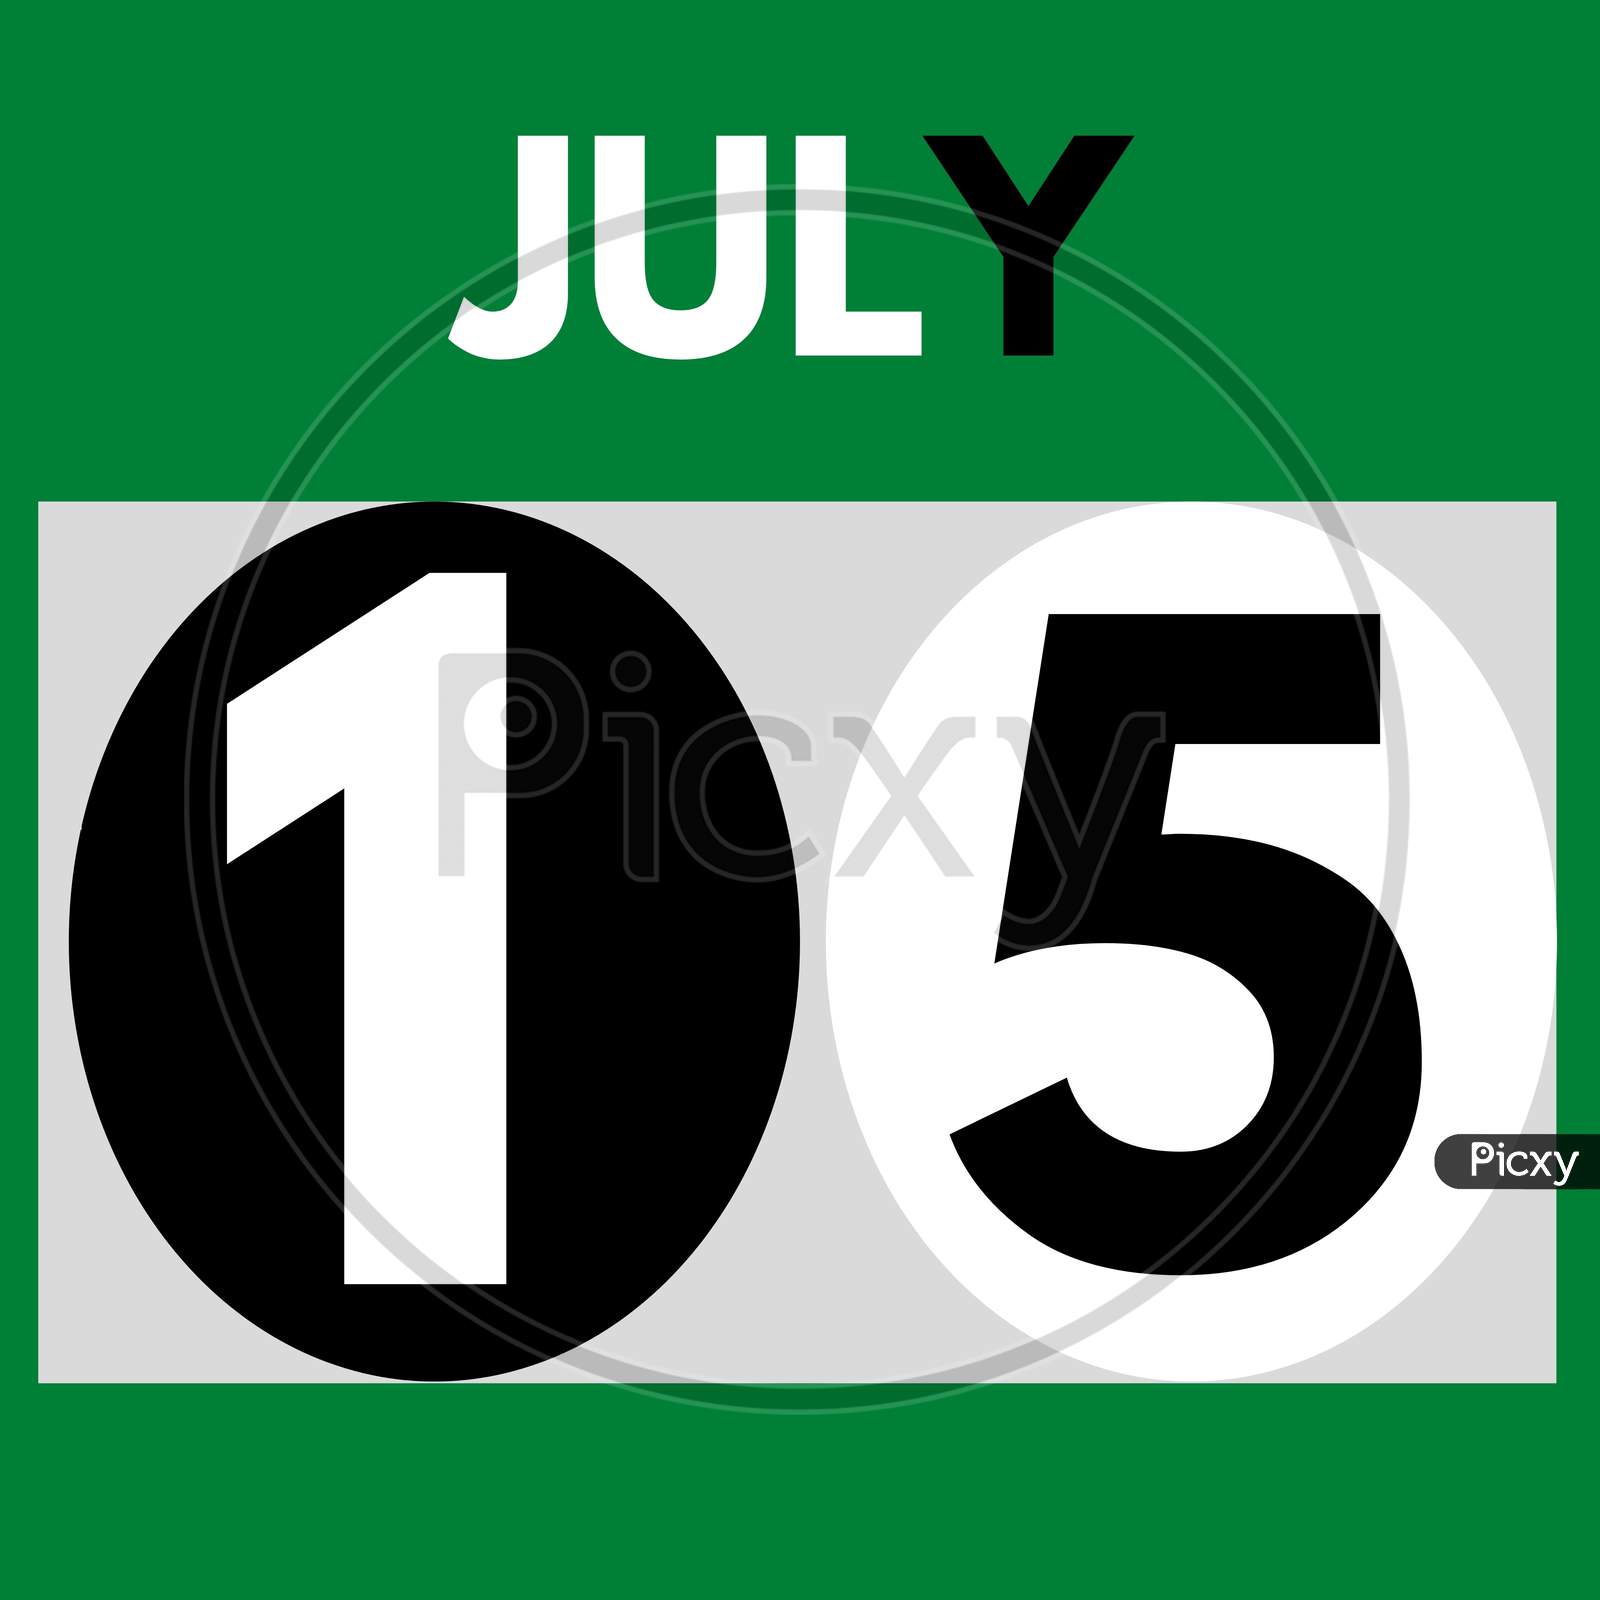 July 15 . Modern Daily Calendar Icon .Date ,Day, Month .Calendar For The Month Of July